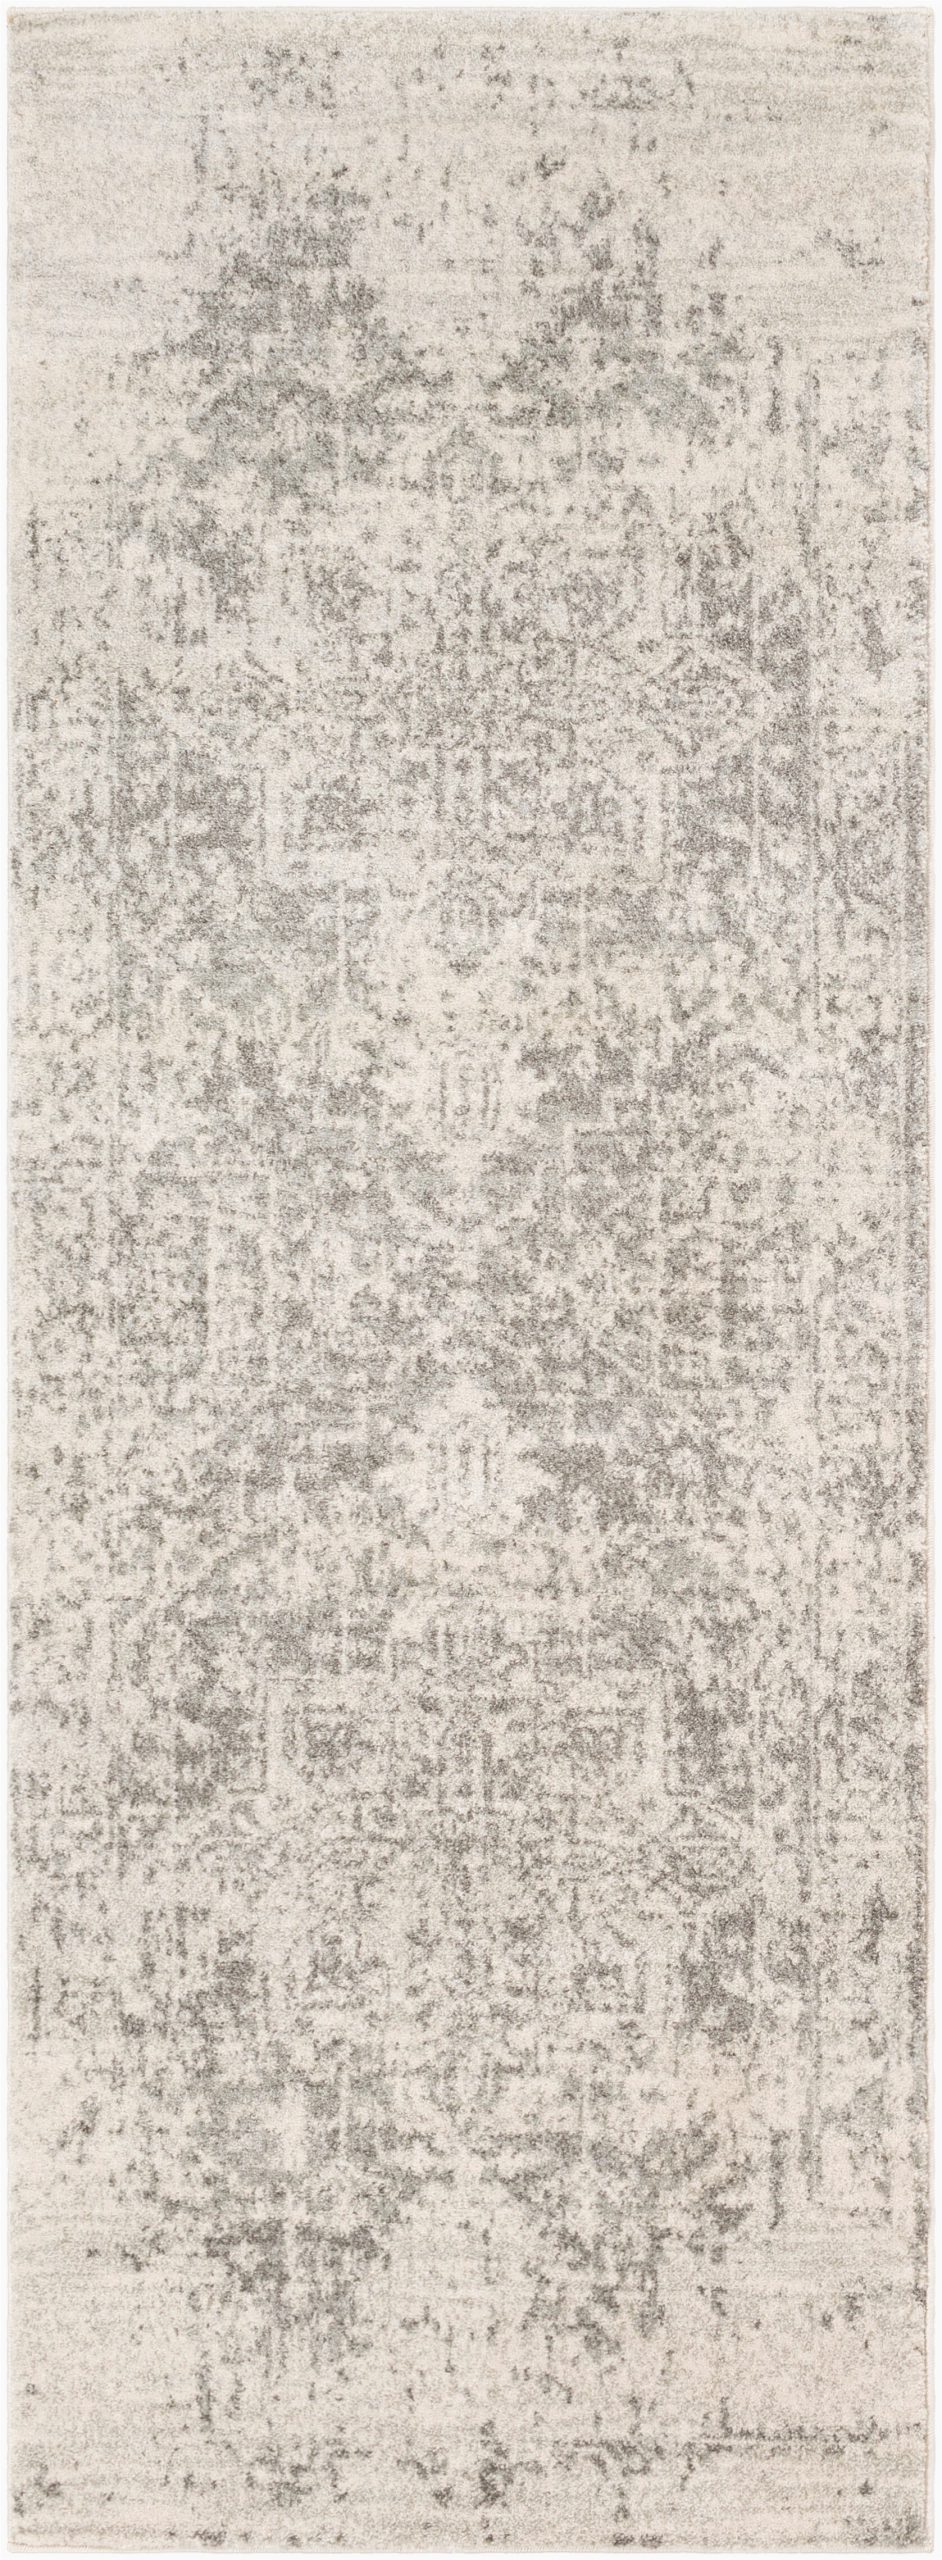 Hillsby Charcoal Light Gray Beige area Rug Hillsby oriental Charcoal Light Gray Beige area Rug